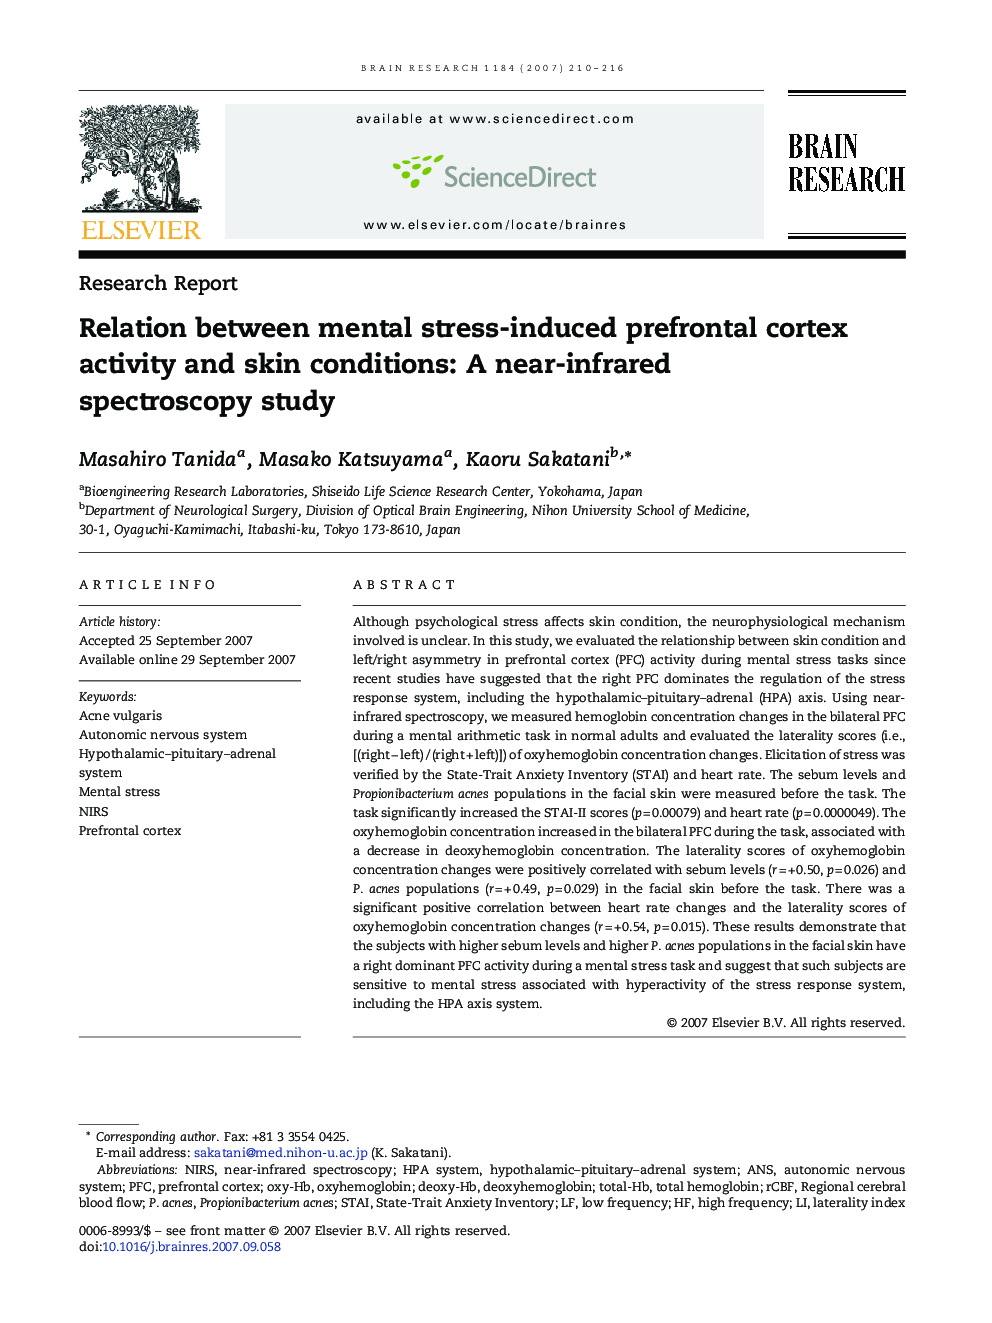 Relation between mental stress-induced prefrontal cortex activity and skin conditions: A near-infrared spectroscopy study